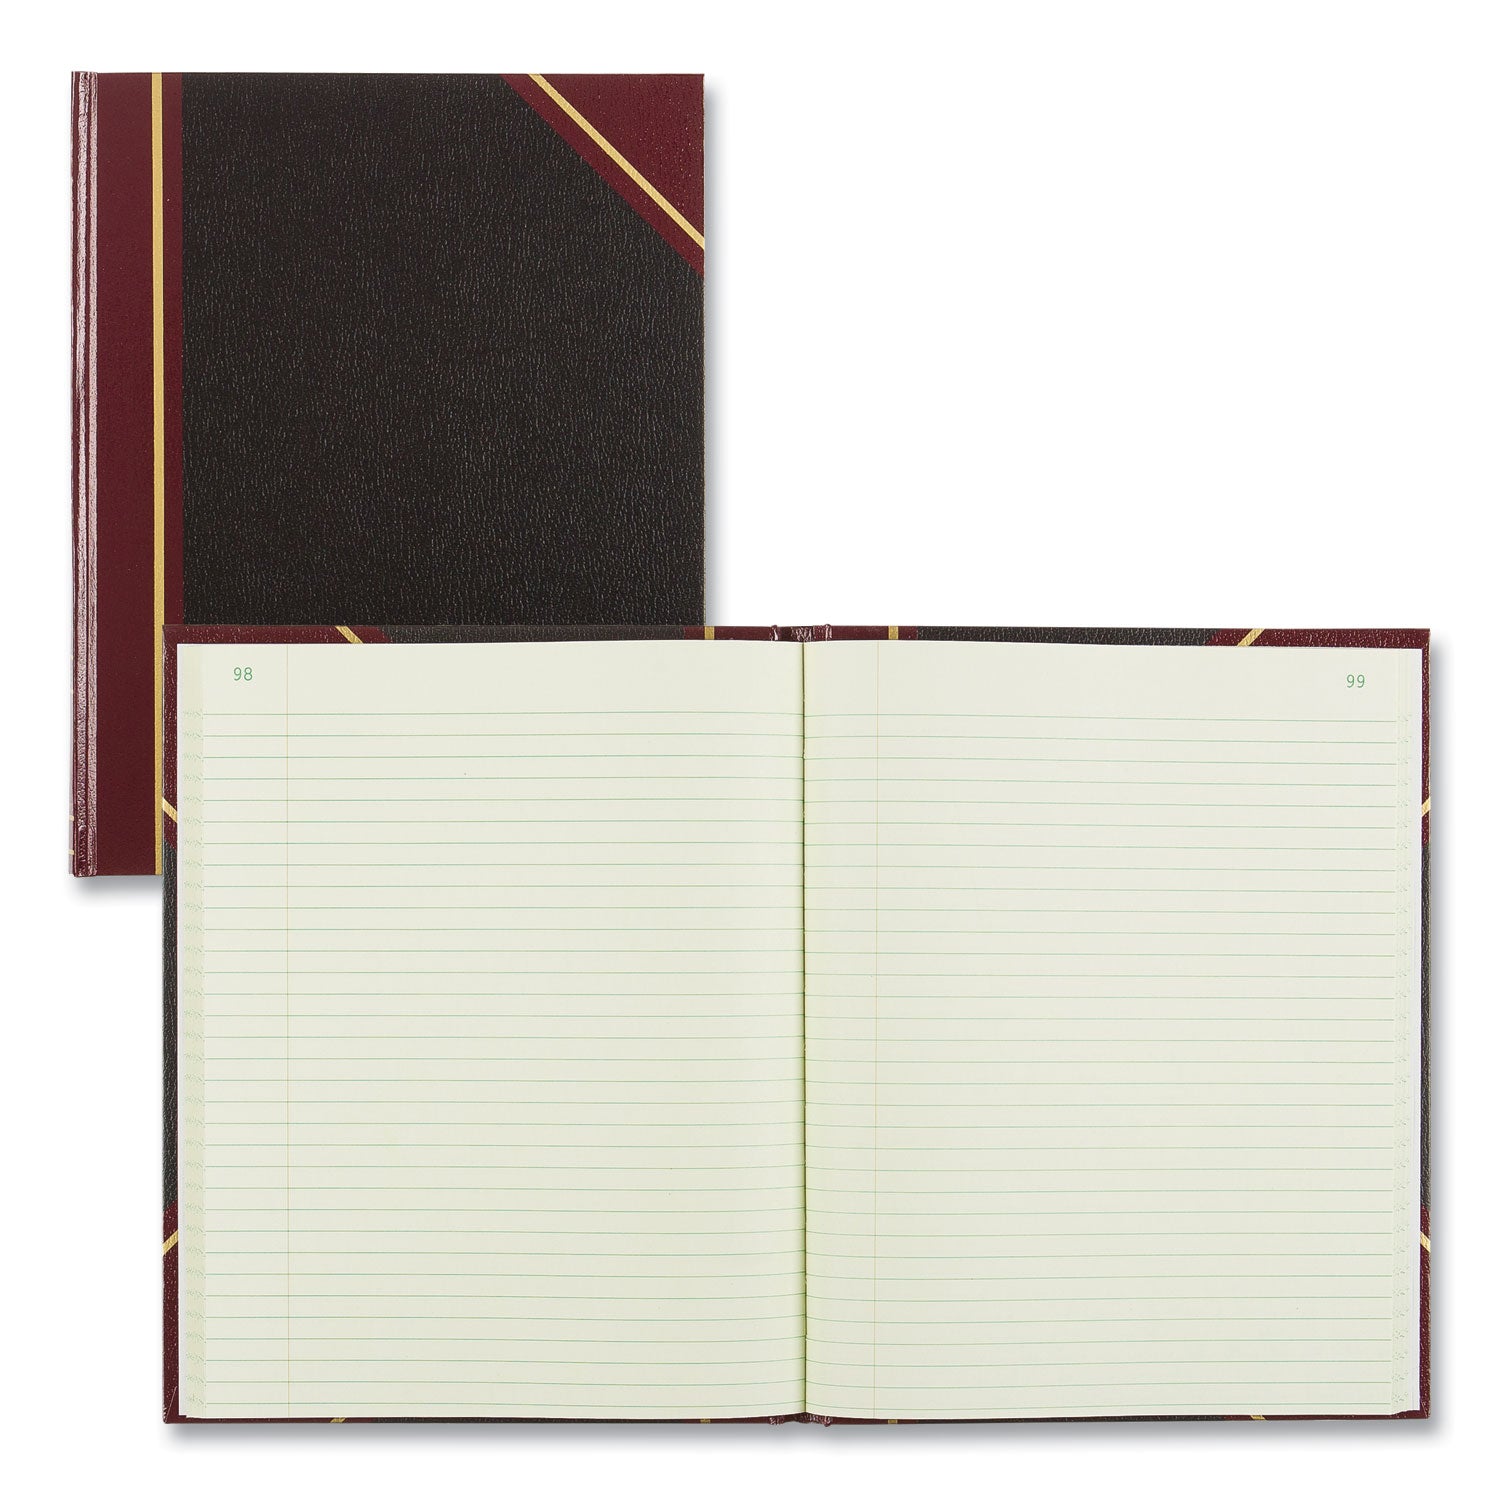 Texthide Eye-Ease Record Book, Black/Burgundy/Gold Cover, 10.38 x 8.38 Sheets, 150 Sheets/Book - 